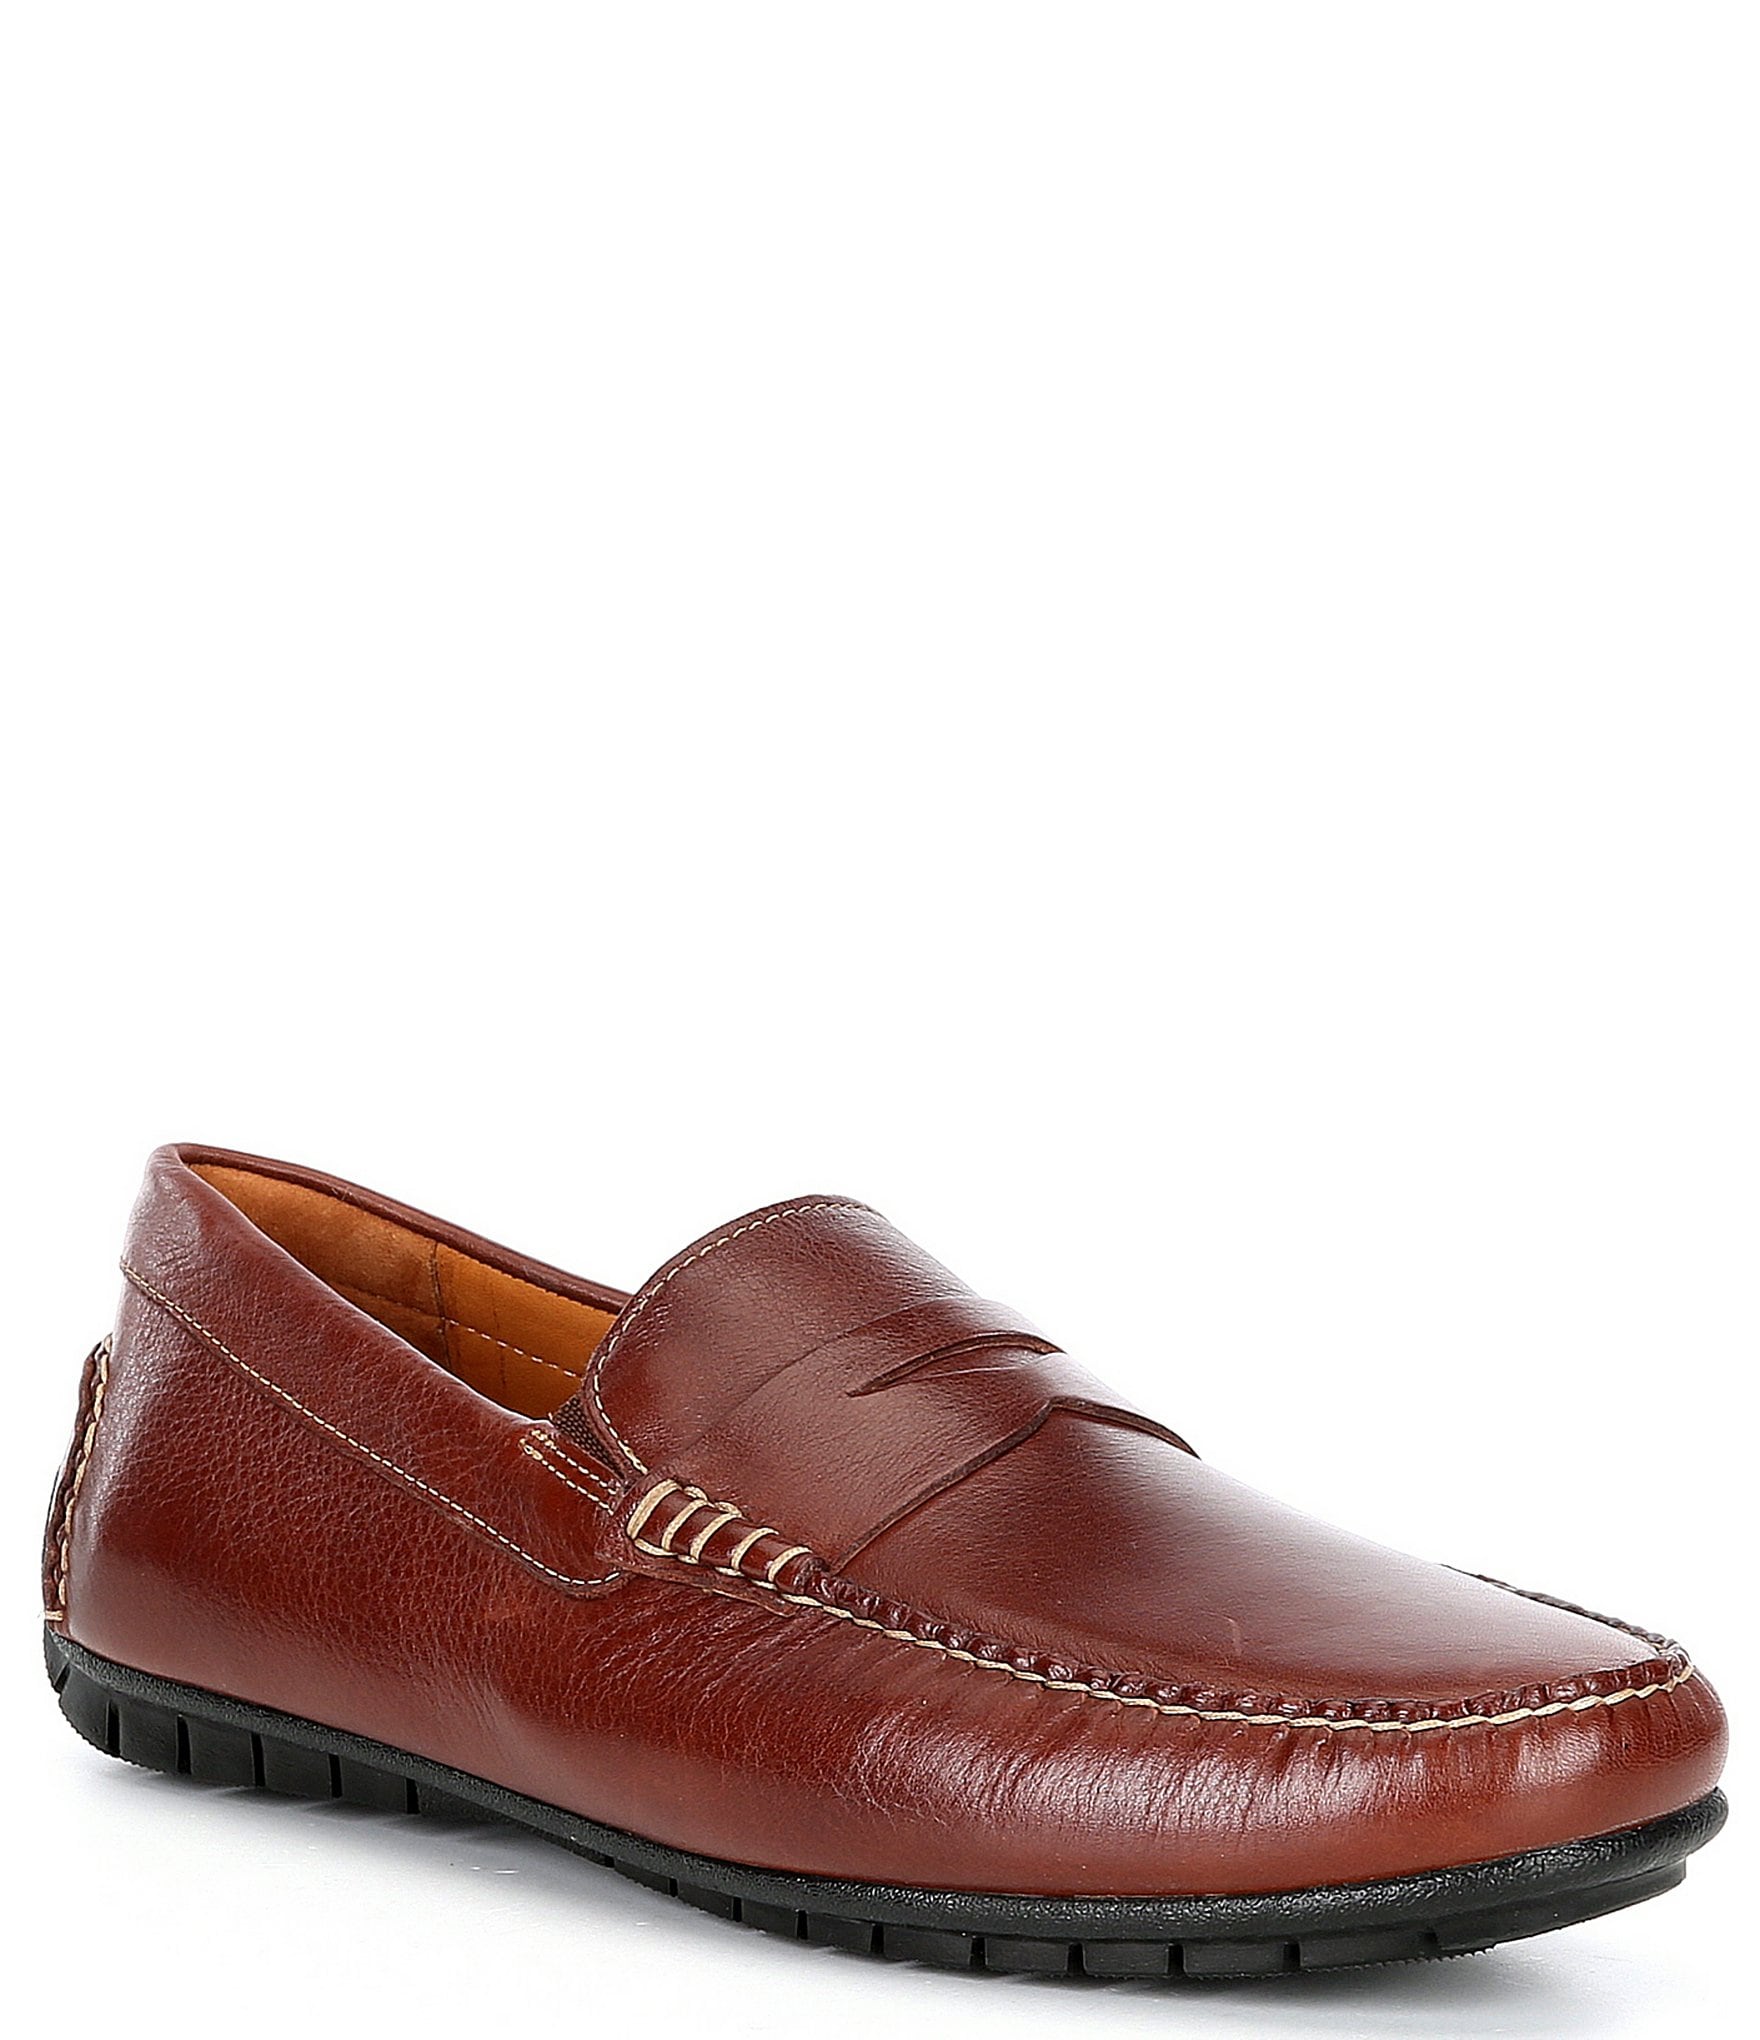 Johnston Murphy CORT 25-8440 Brown Dress Shoes With Removable Insoles ...